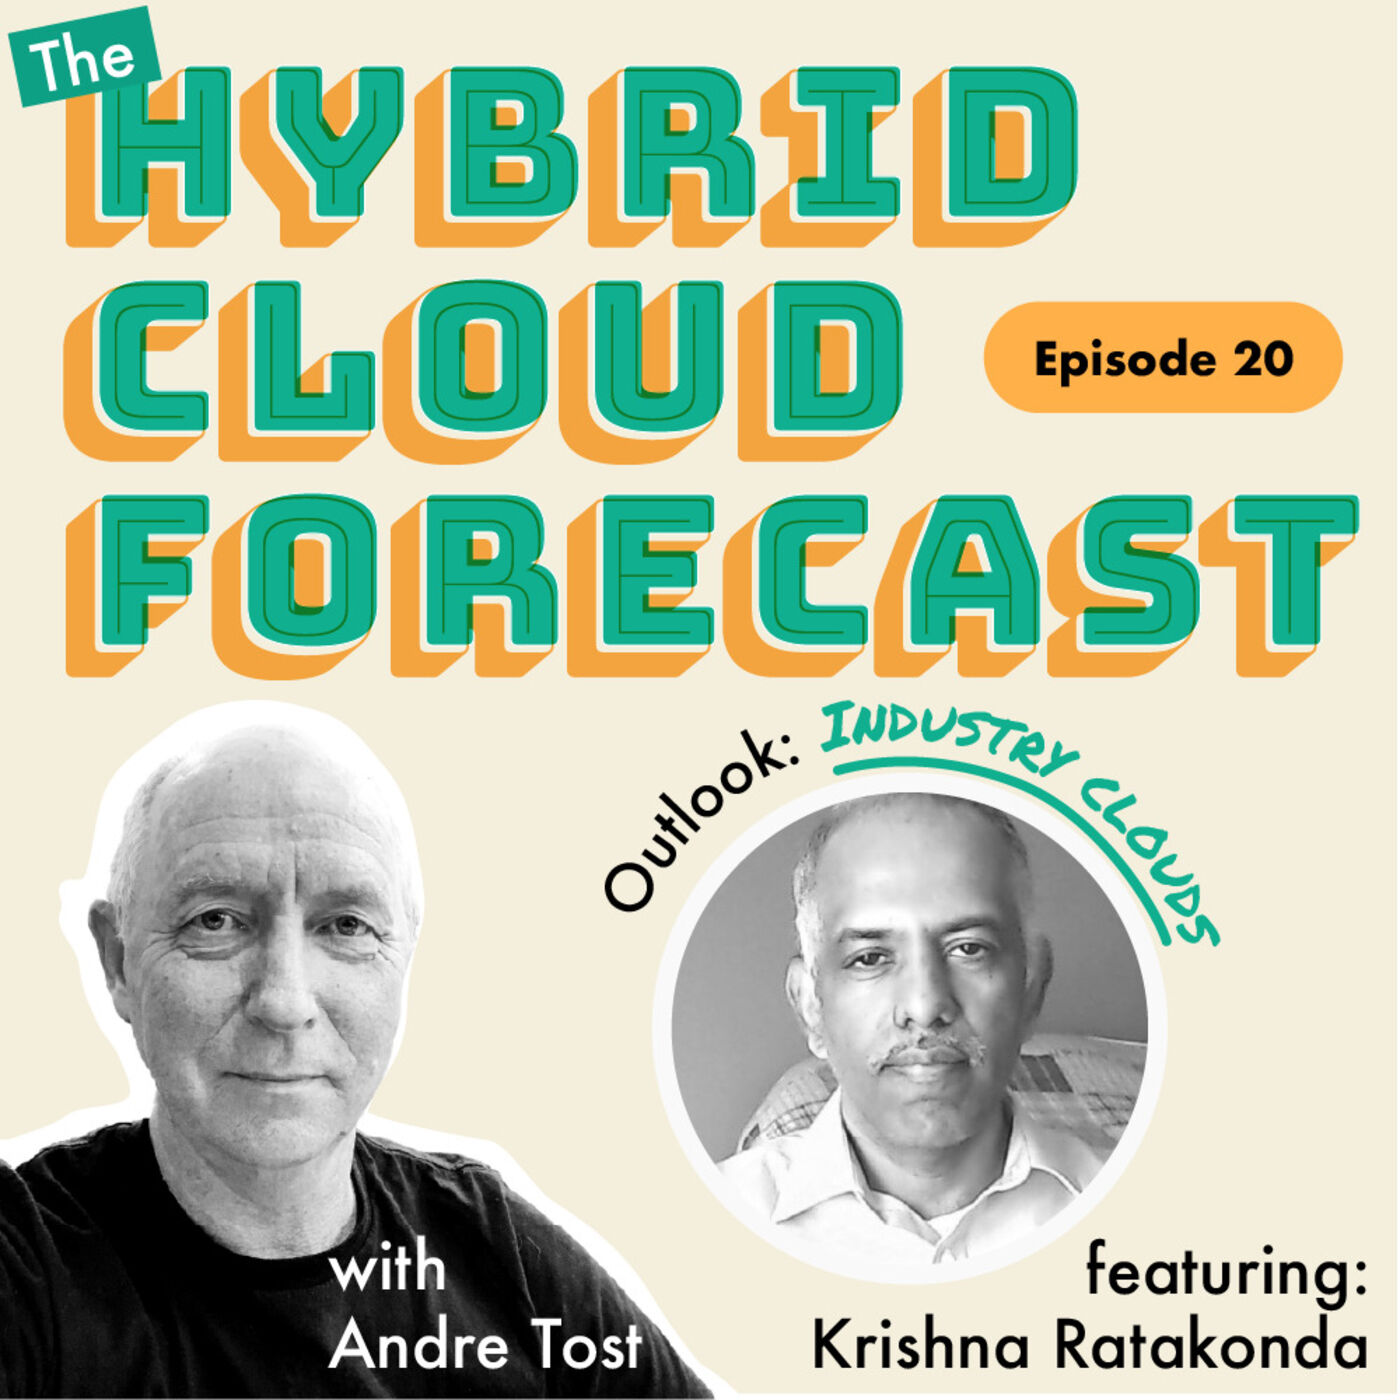 Episode 20: The Hybrid Cloud Forecast Series - Outlook: Industry Clouds